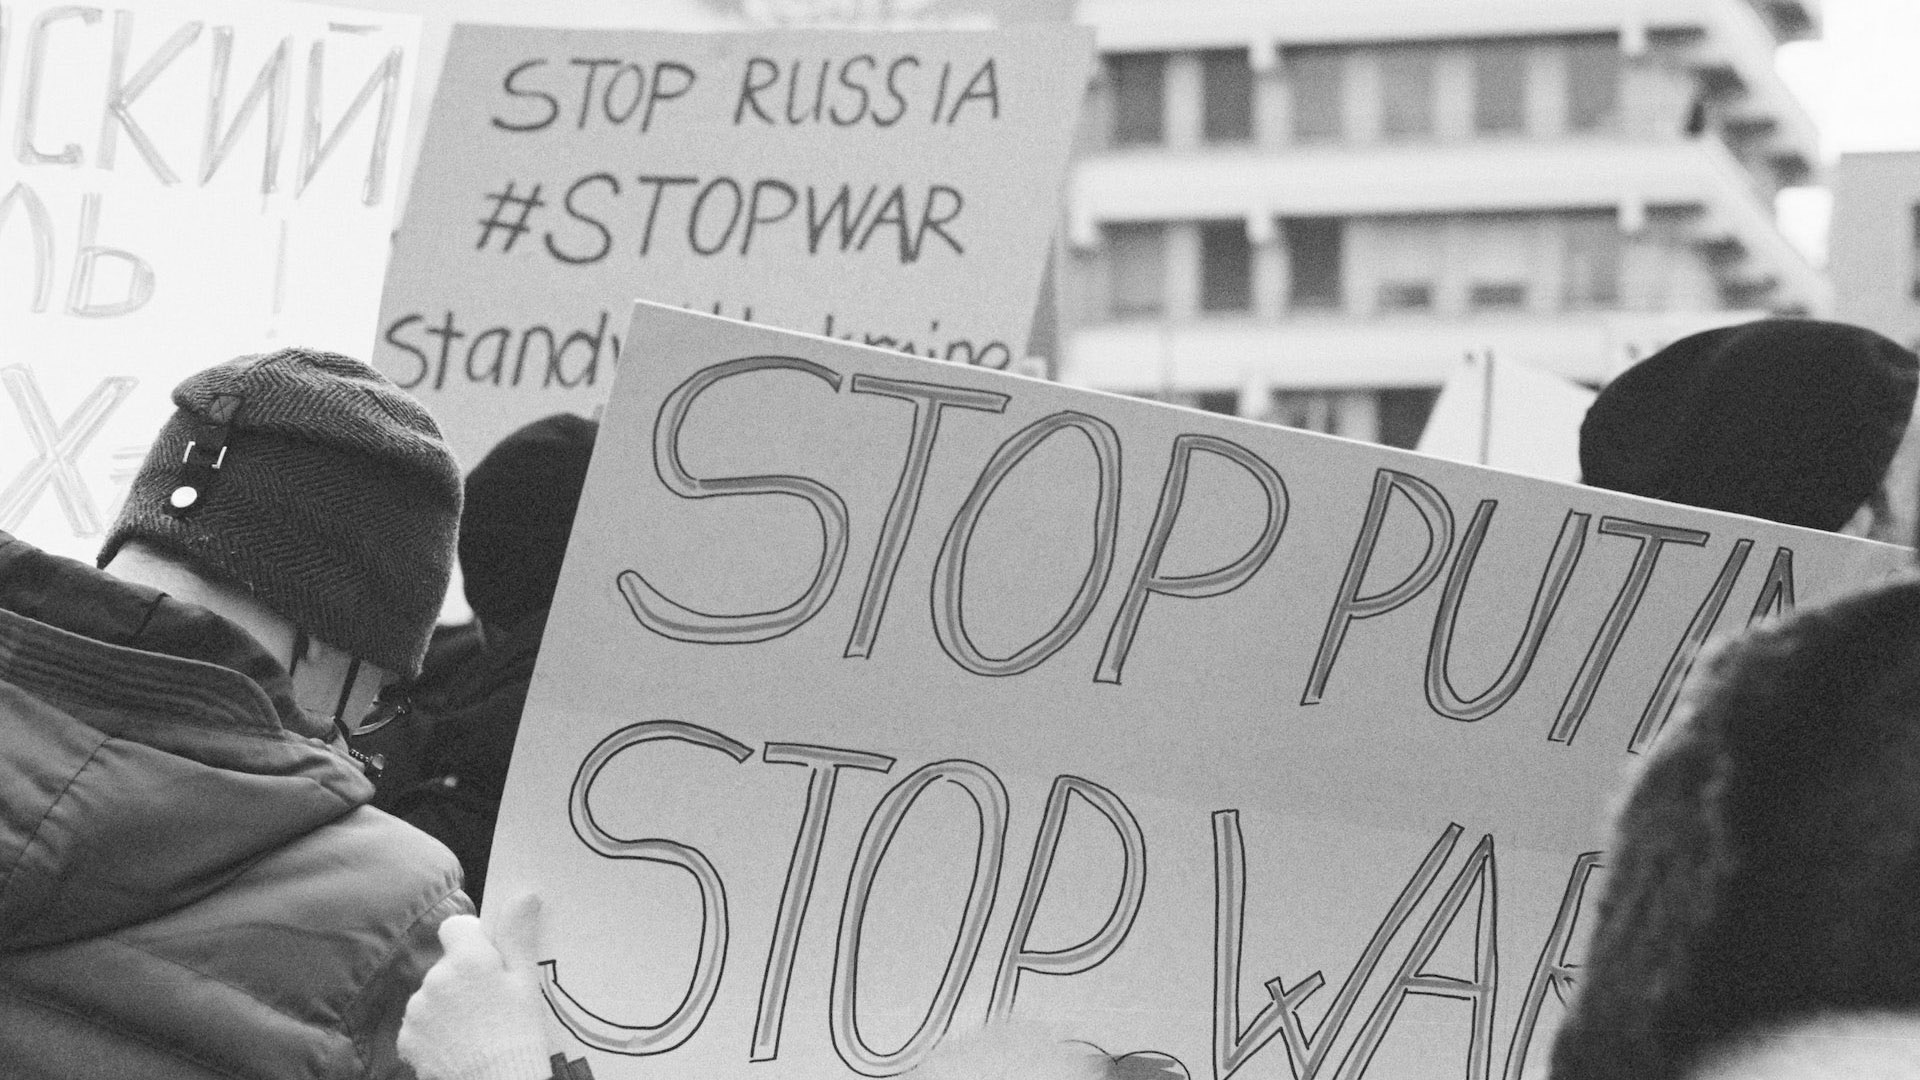 An image of protesters holding up signs about the Ukraine war. Signs say "Stop Russia. #Stopwar. Stop Putin." and more.